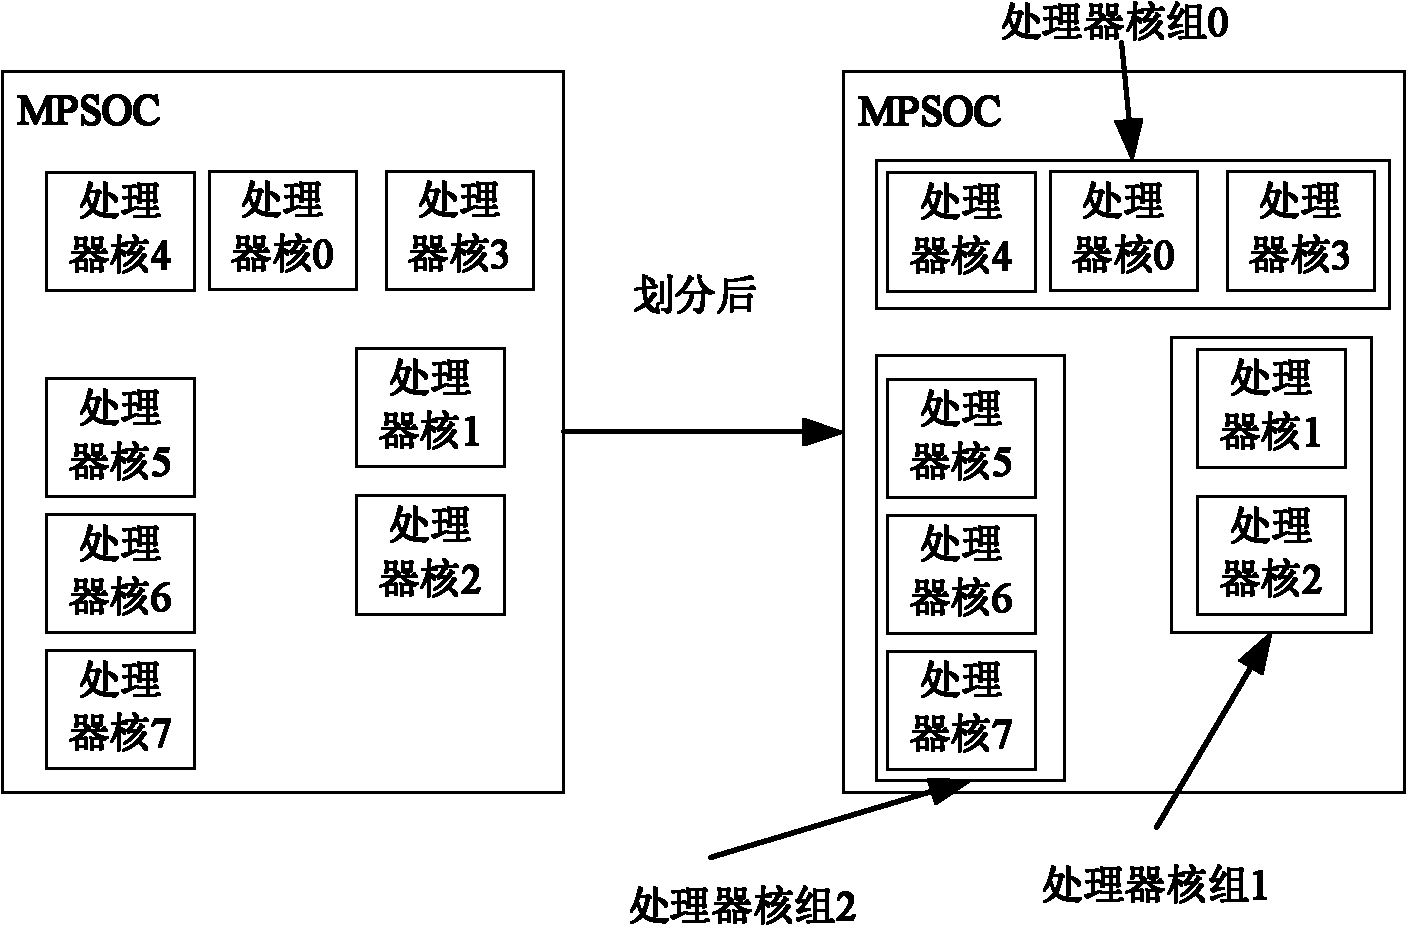 MPSoC (multi-processor system-on-chip)-oriented multithread scheduling method